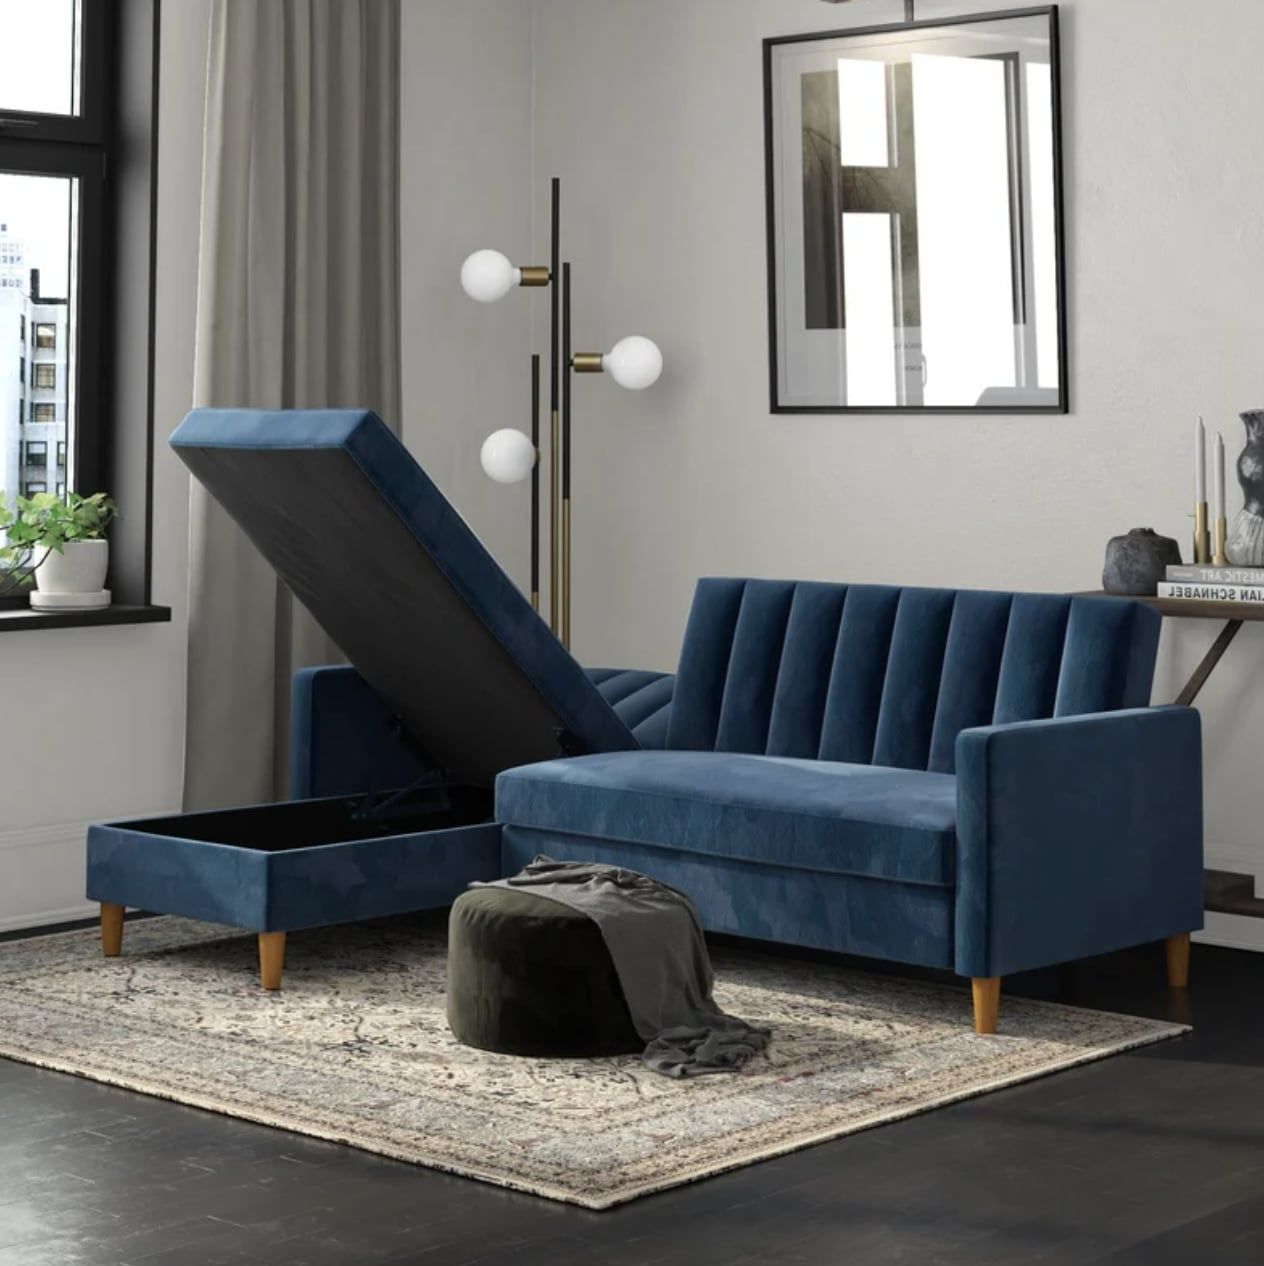 Best And Most Comfortable Sofas With Storage 2022 | Popsugar Home Within Convertible Sofa With Matching Chaise (Gallery 6 of 20)